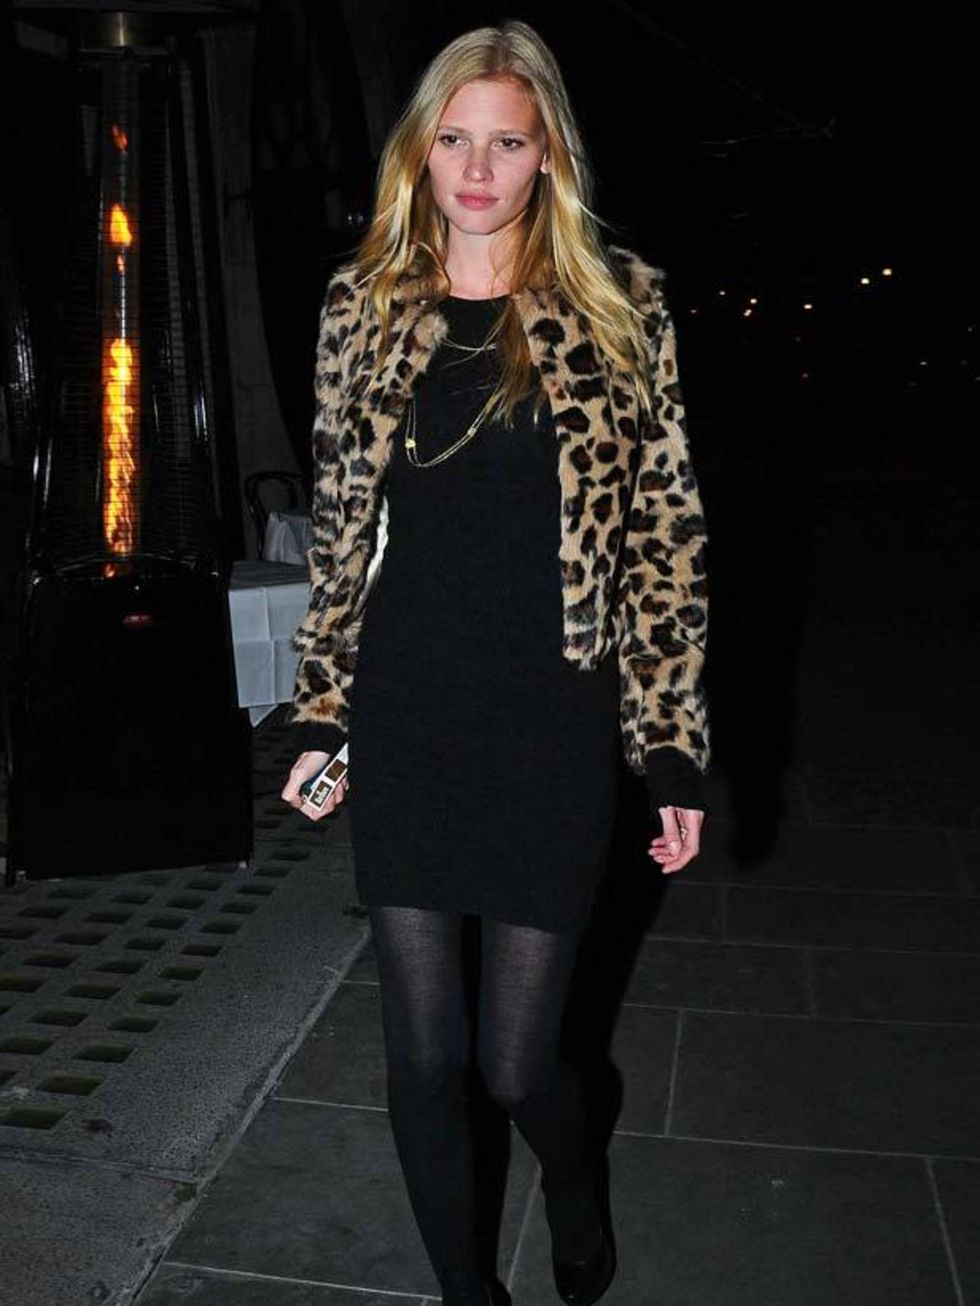 <p><a href="http://www.elleuk.com/starstyle/style-files/%28section%29/lara-stone">Lara Stone</a> out in London's Mayfair</p>